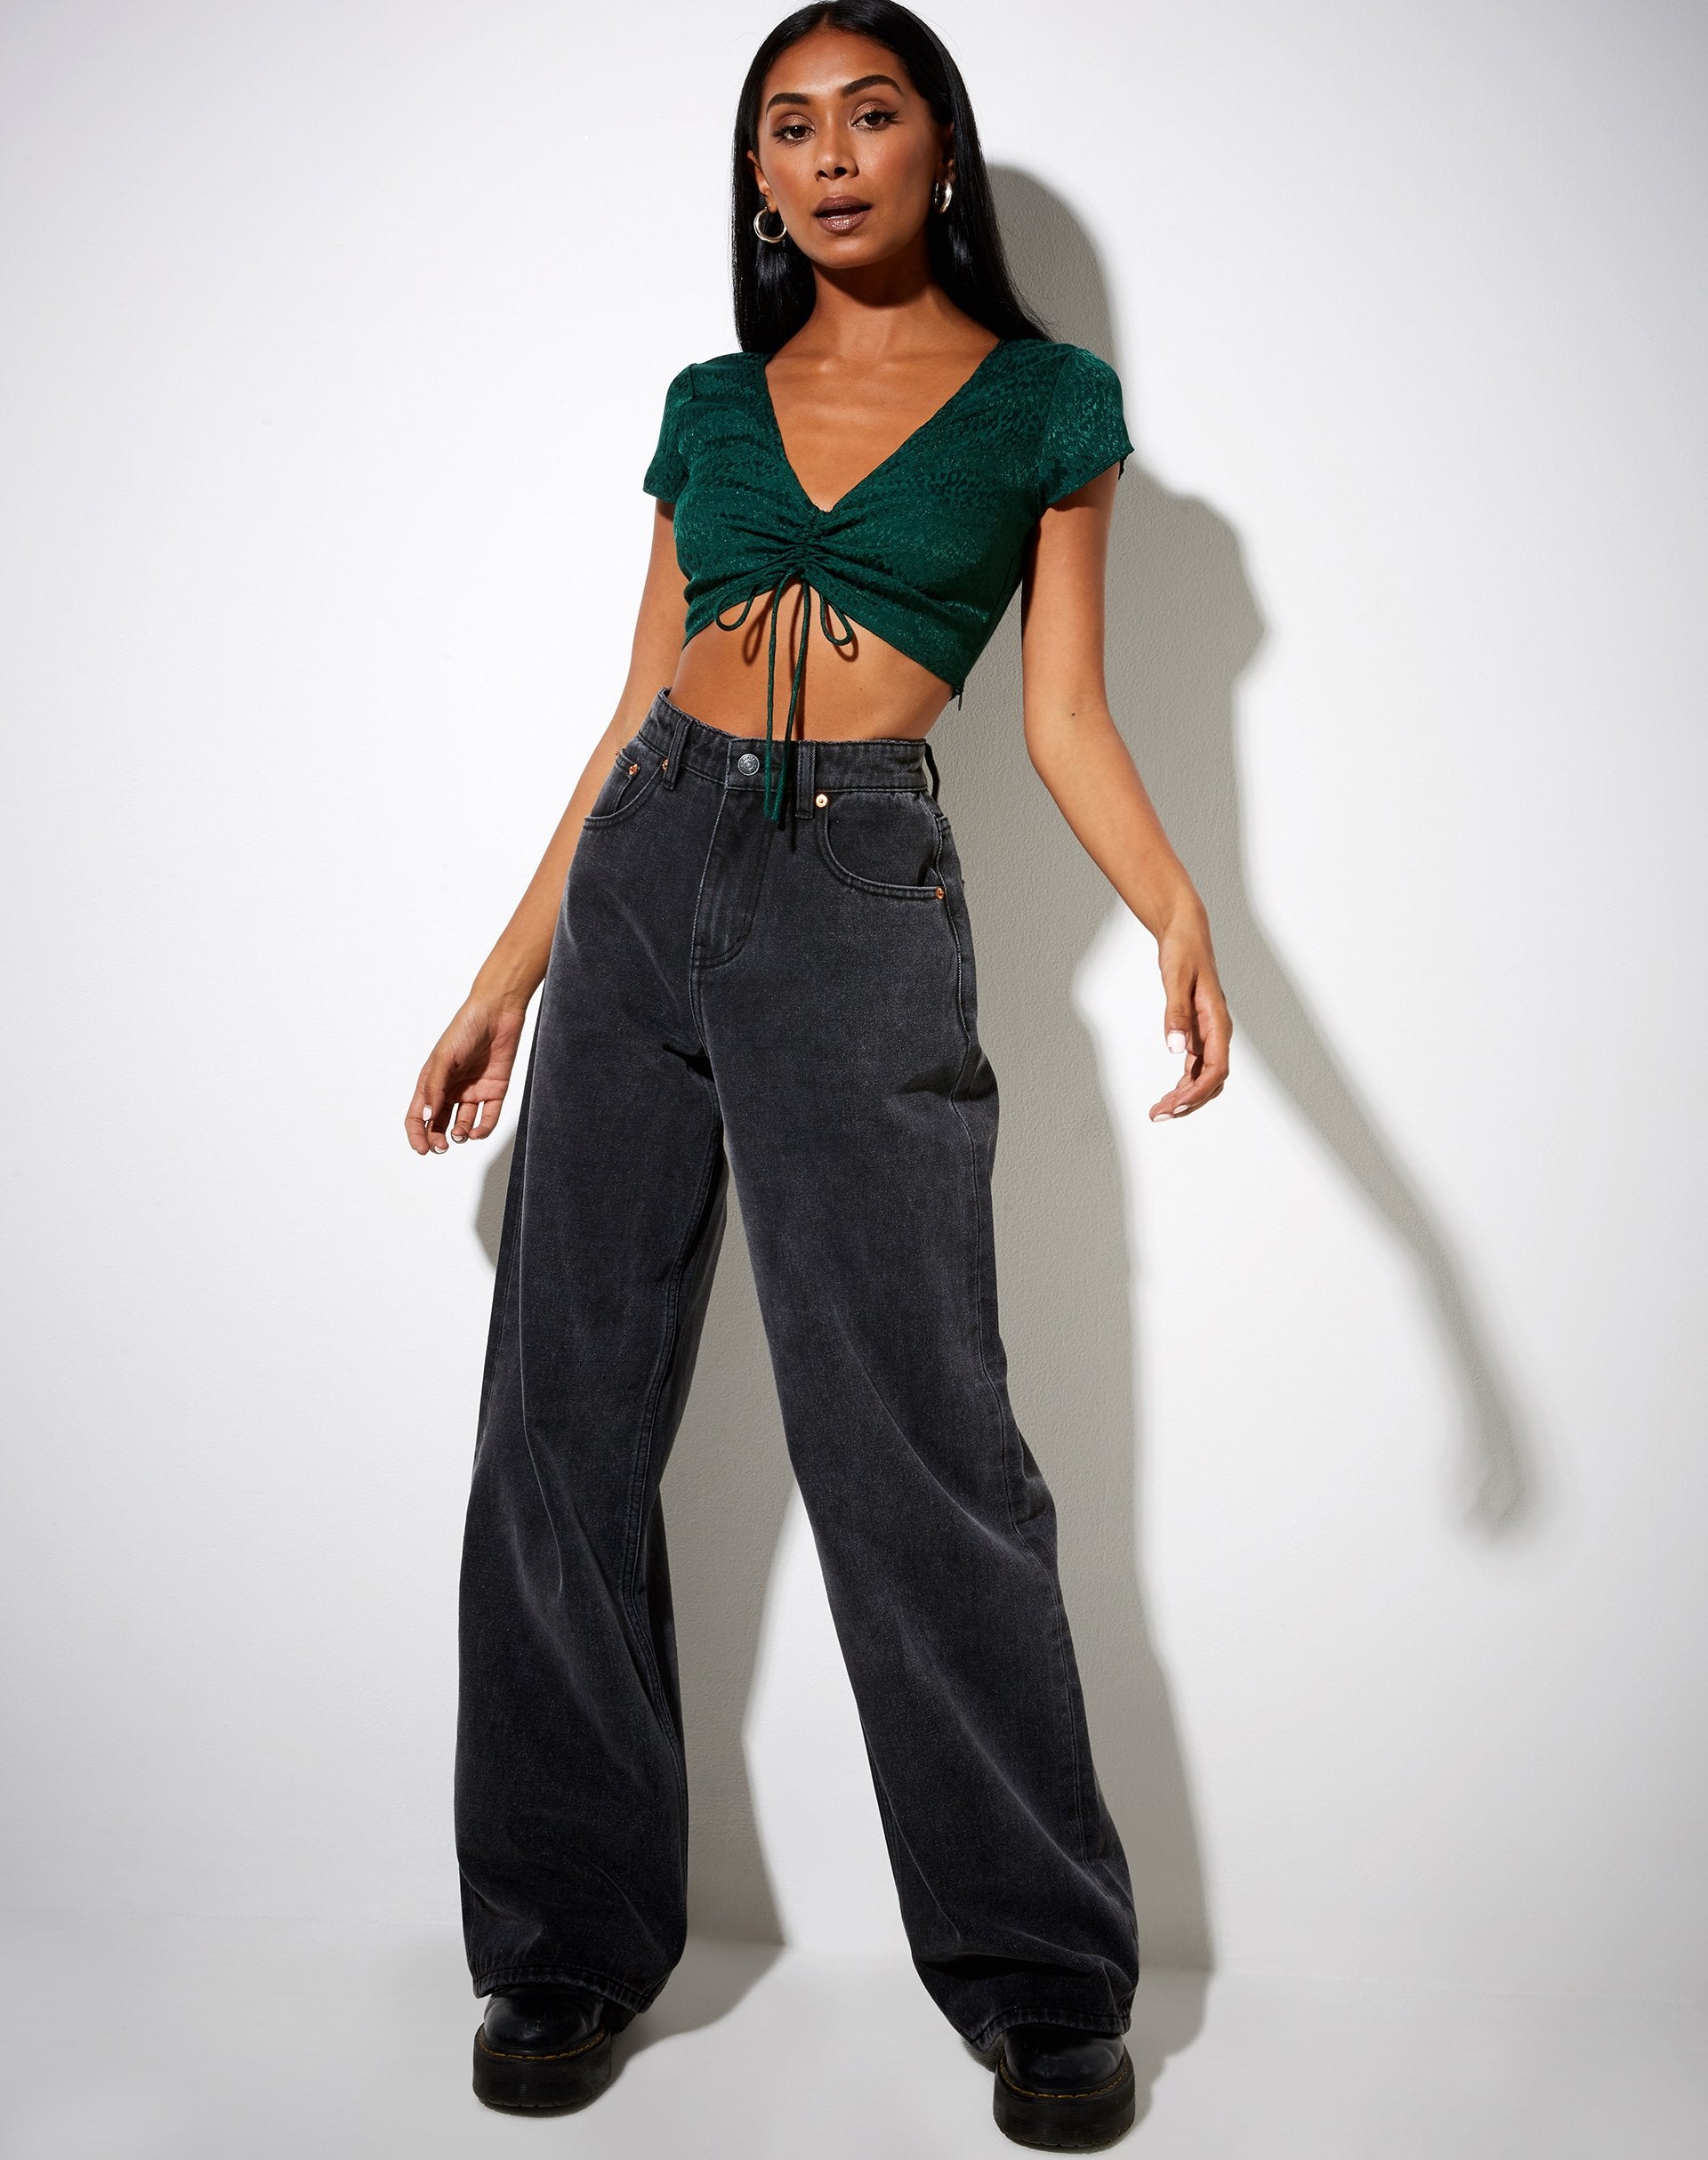 Image of Raeto Crop Top in Satin Cheetah Forest Green